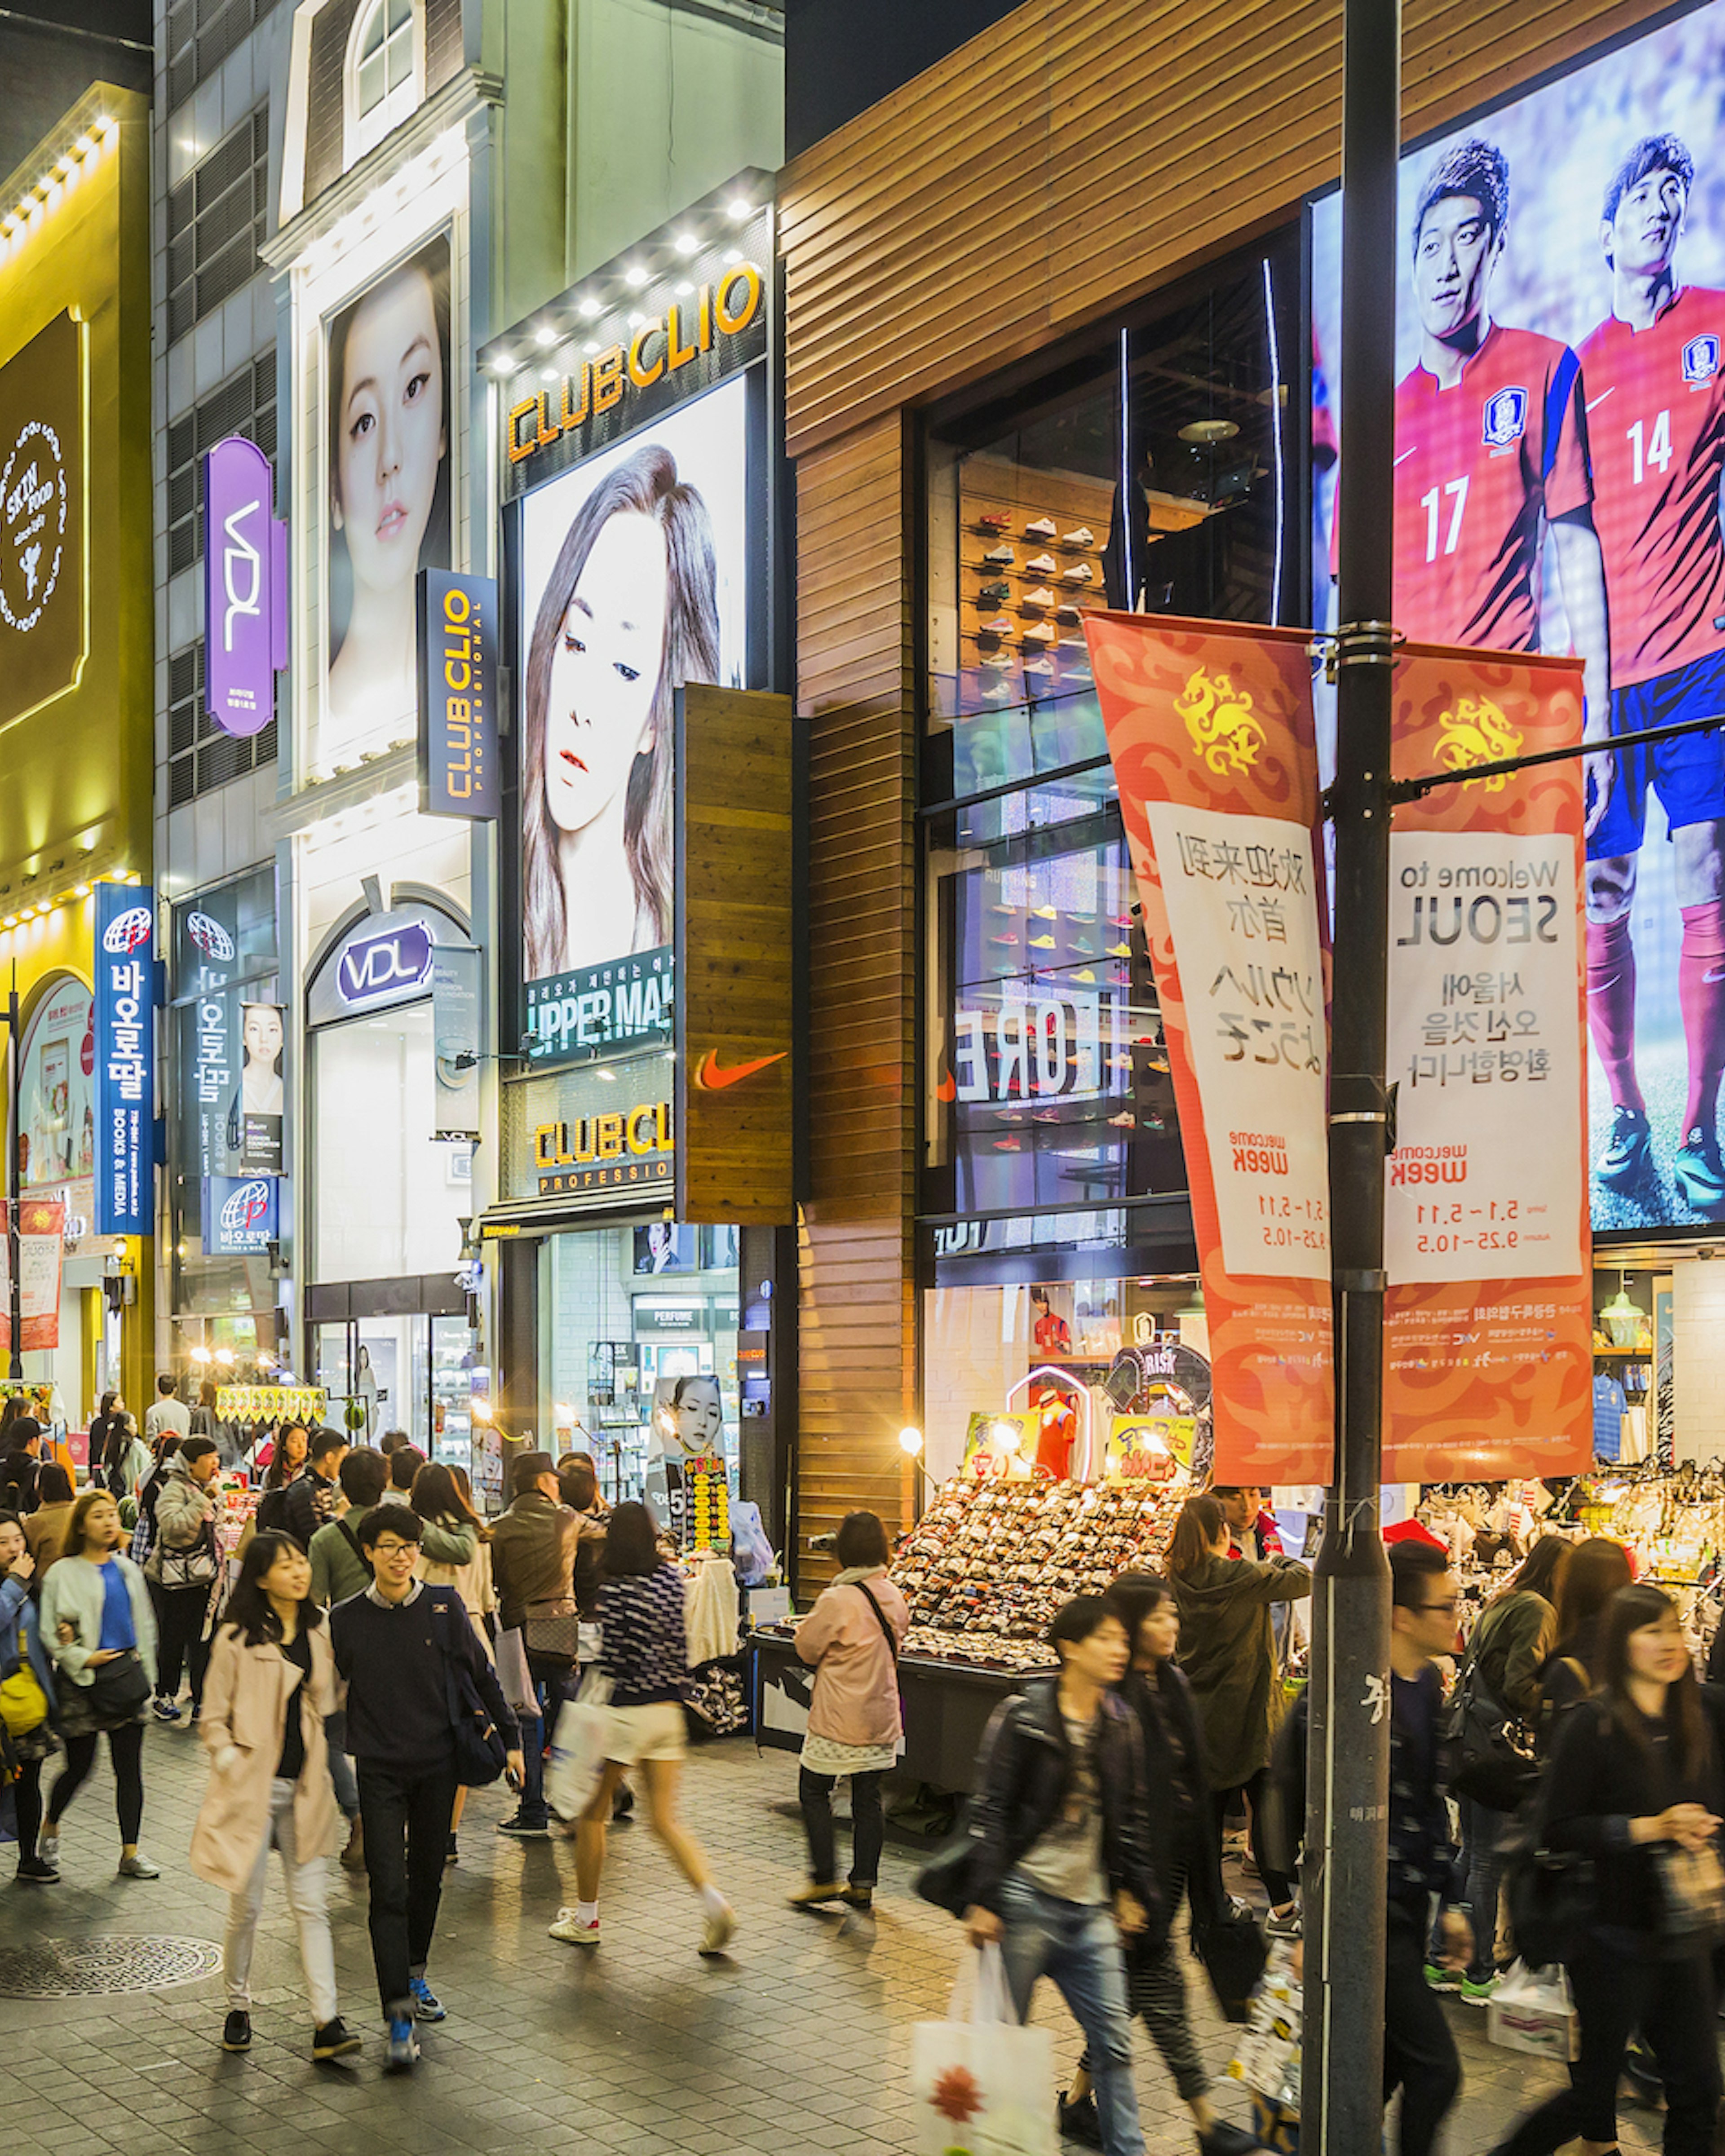 The famous shopping streets of Myeong-dong